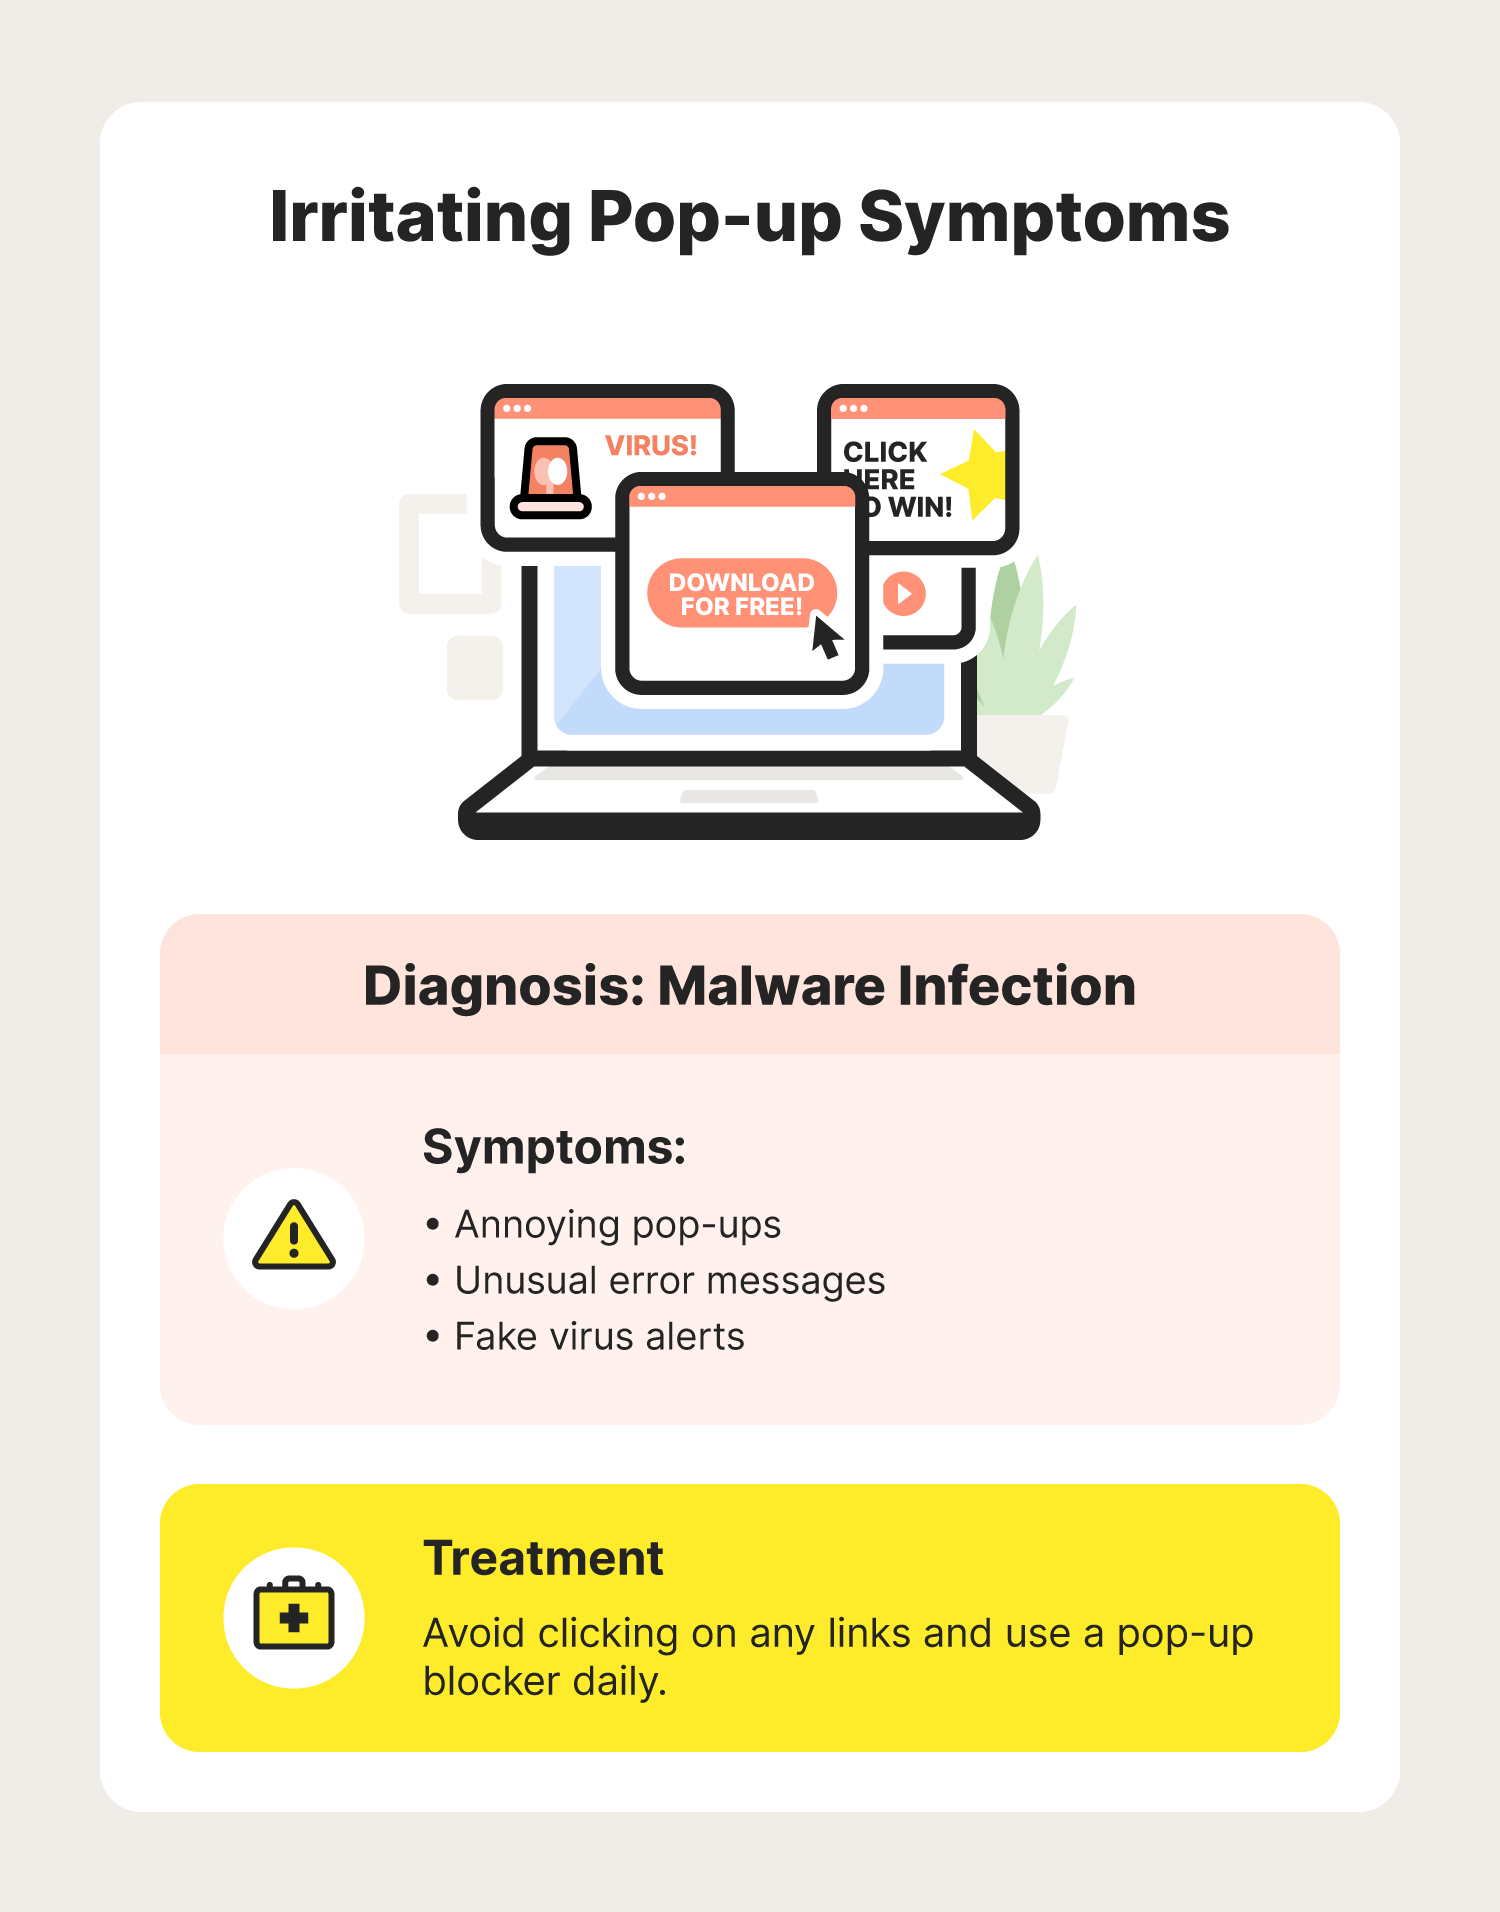 A graphic showcases irritating pop-up symptoms that are signs of malware.